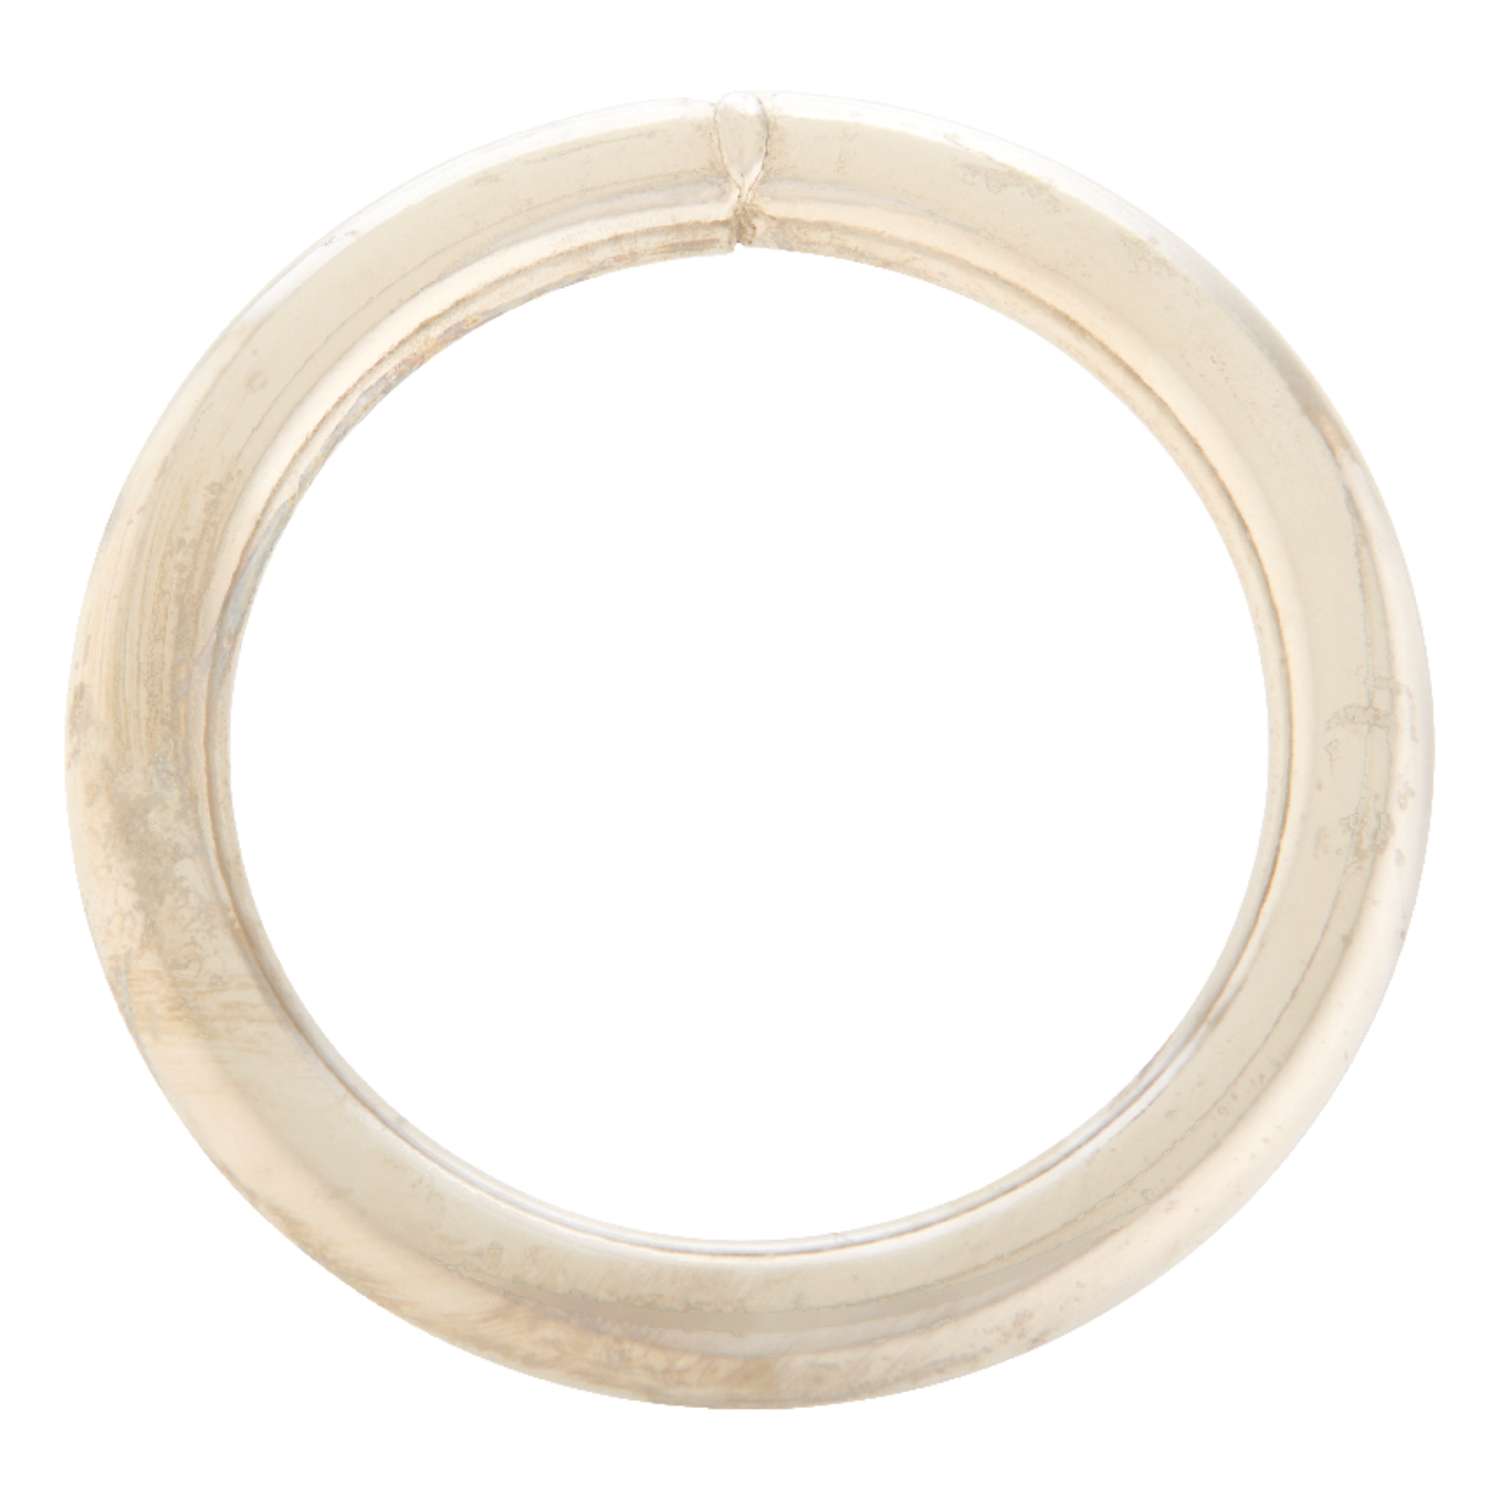 Campbell T7665042 1-1/2 Welded Rings 